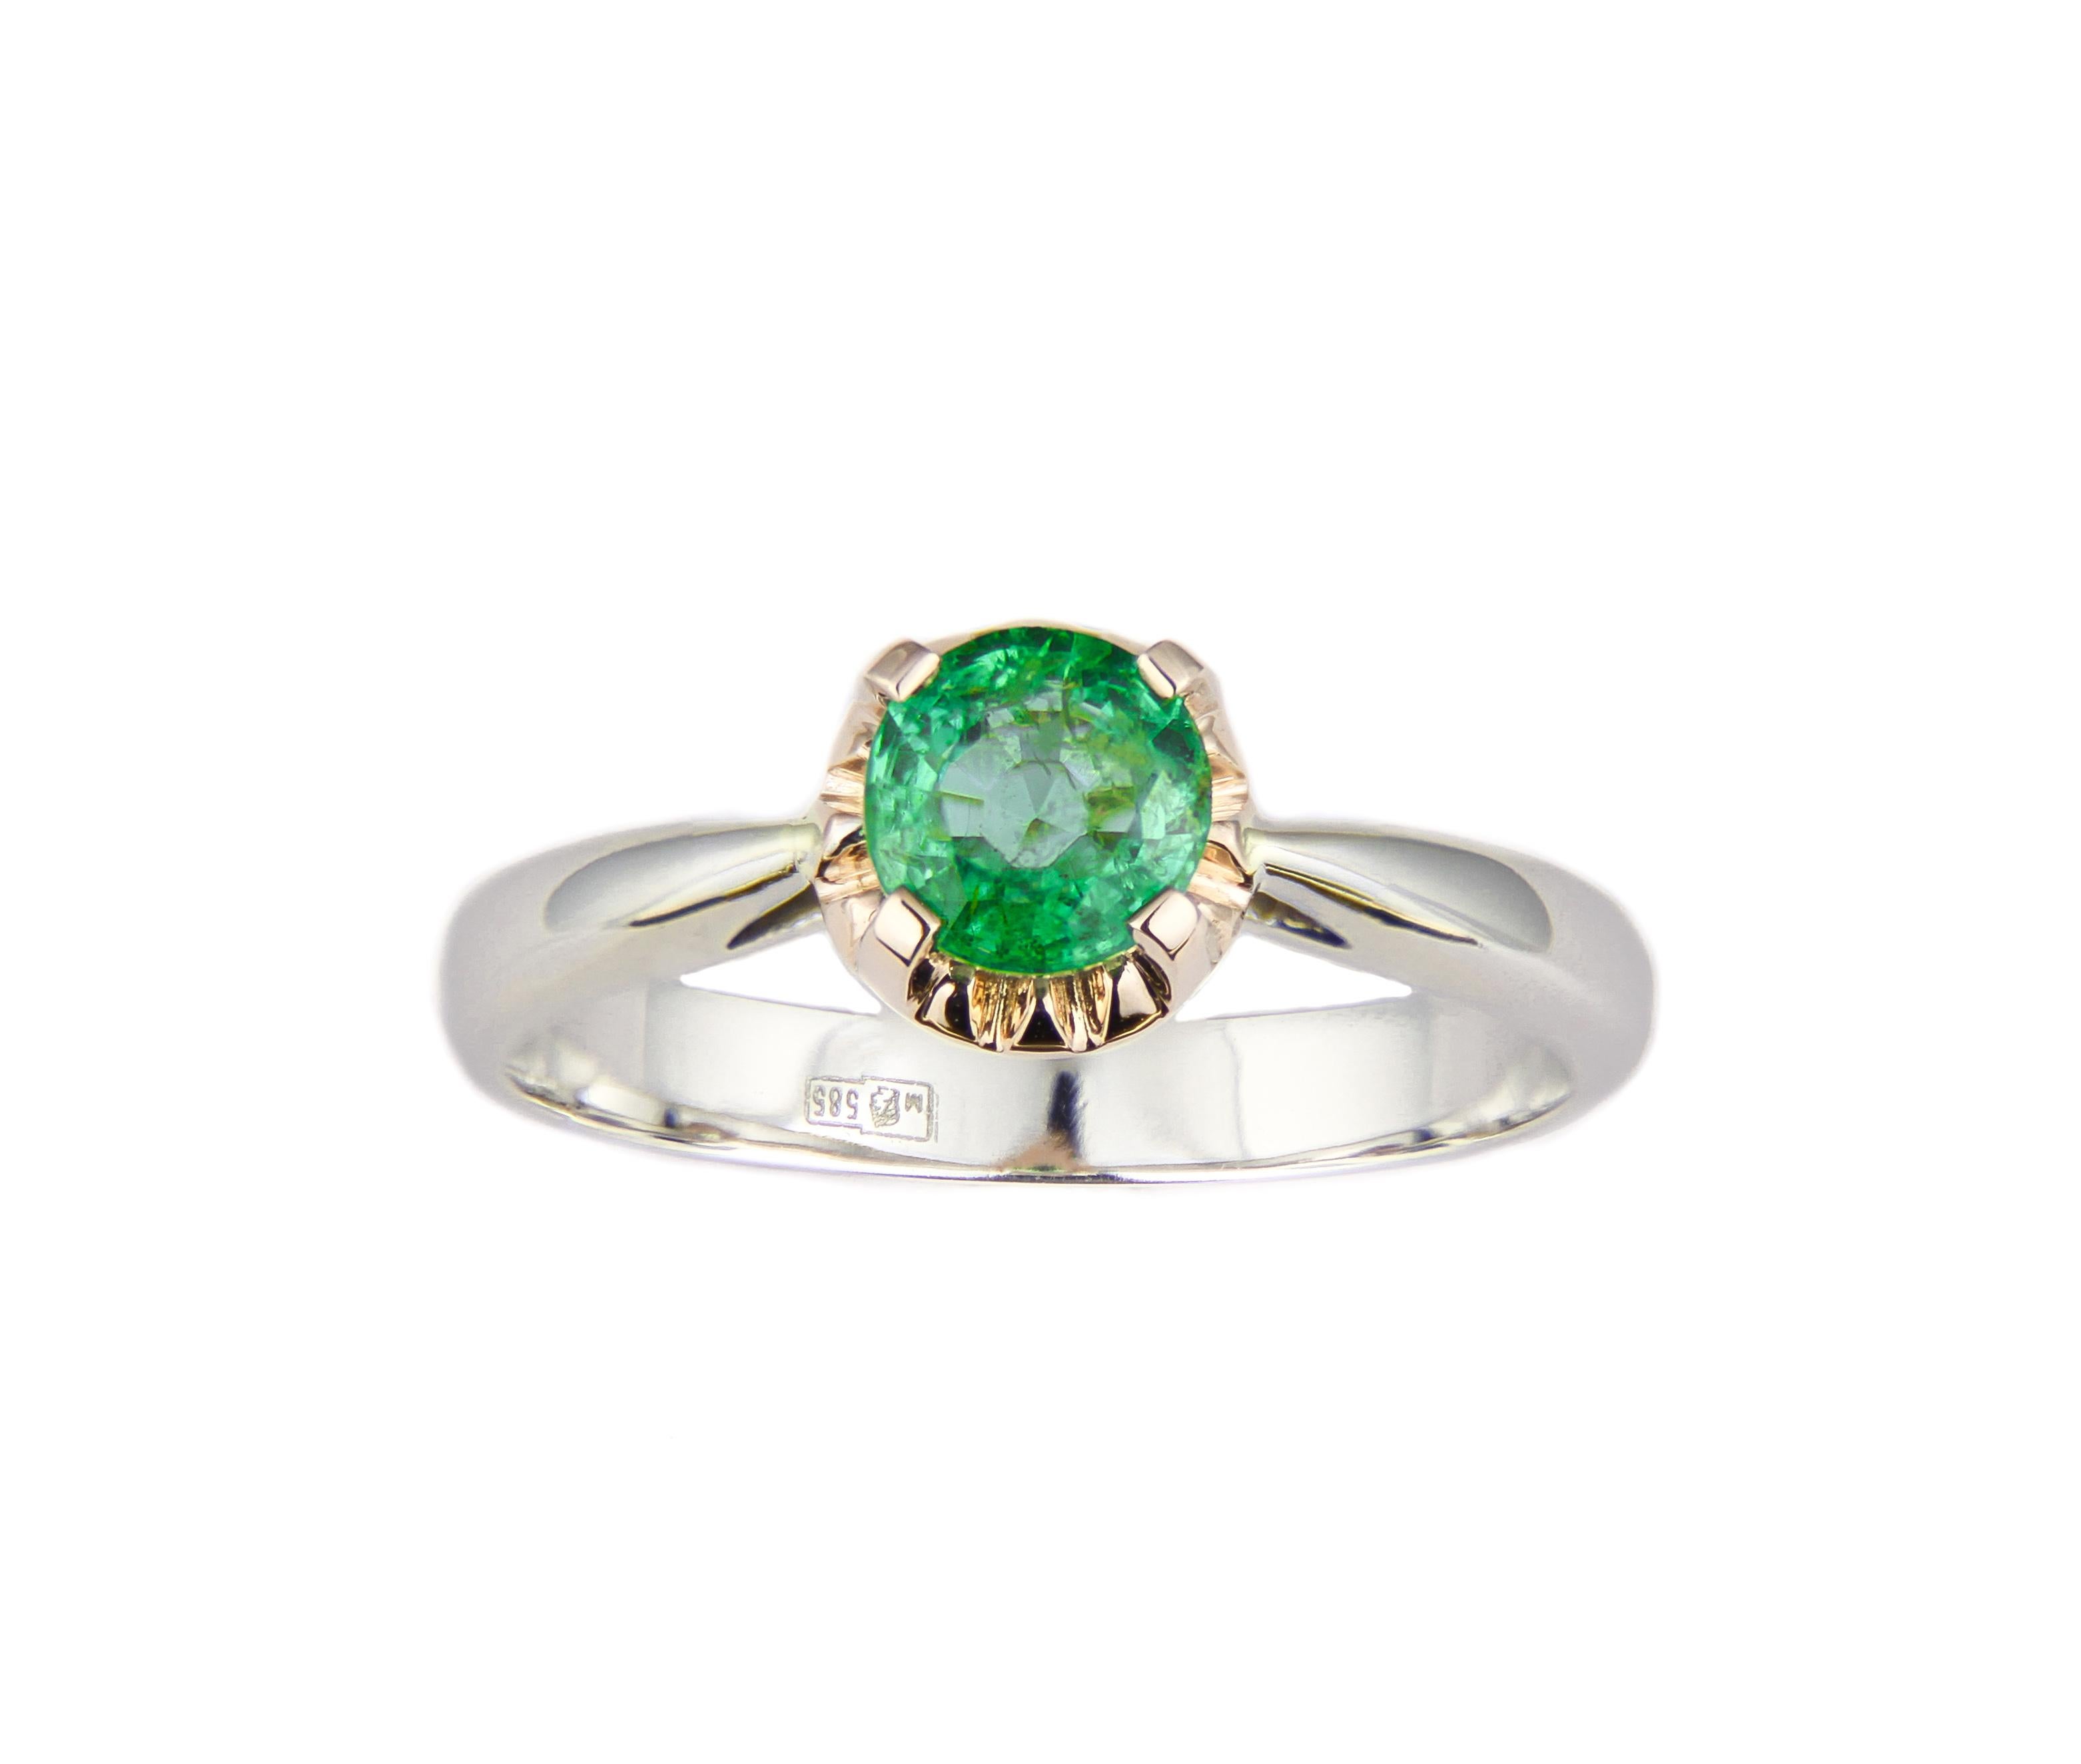 For Sale:  Emerald Soliter Ring in 14k Two Tone Gold, Emerald Engagement Ring 4